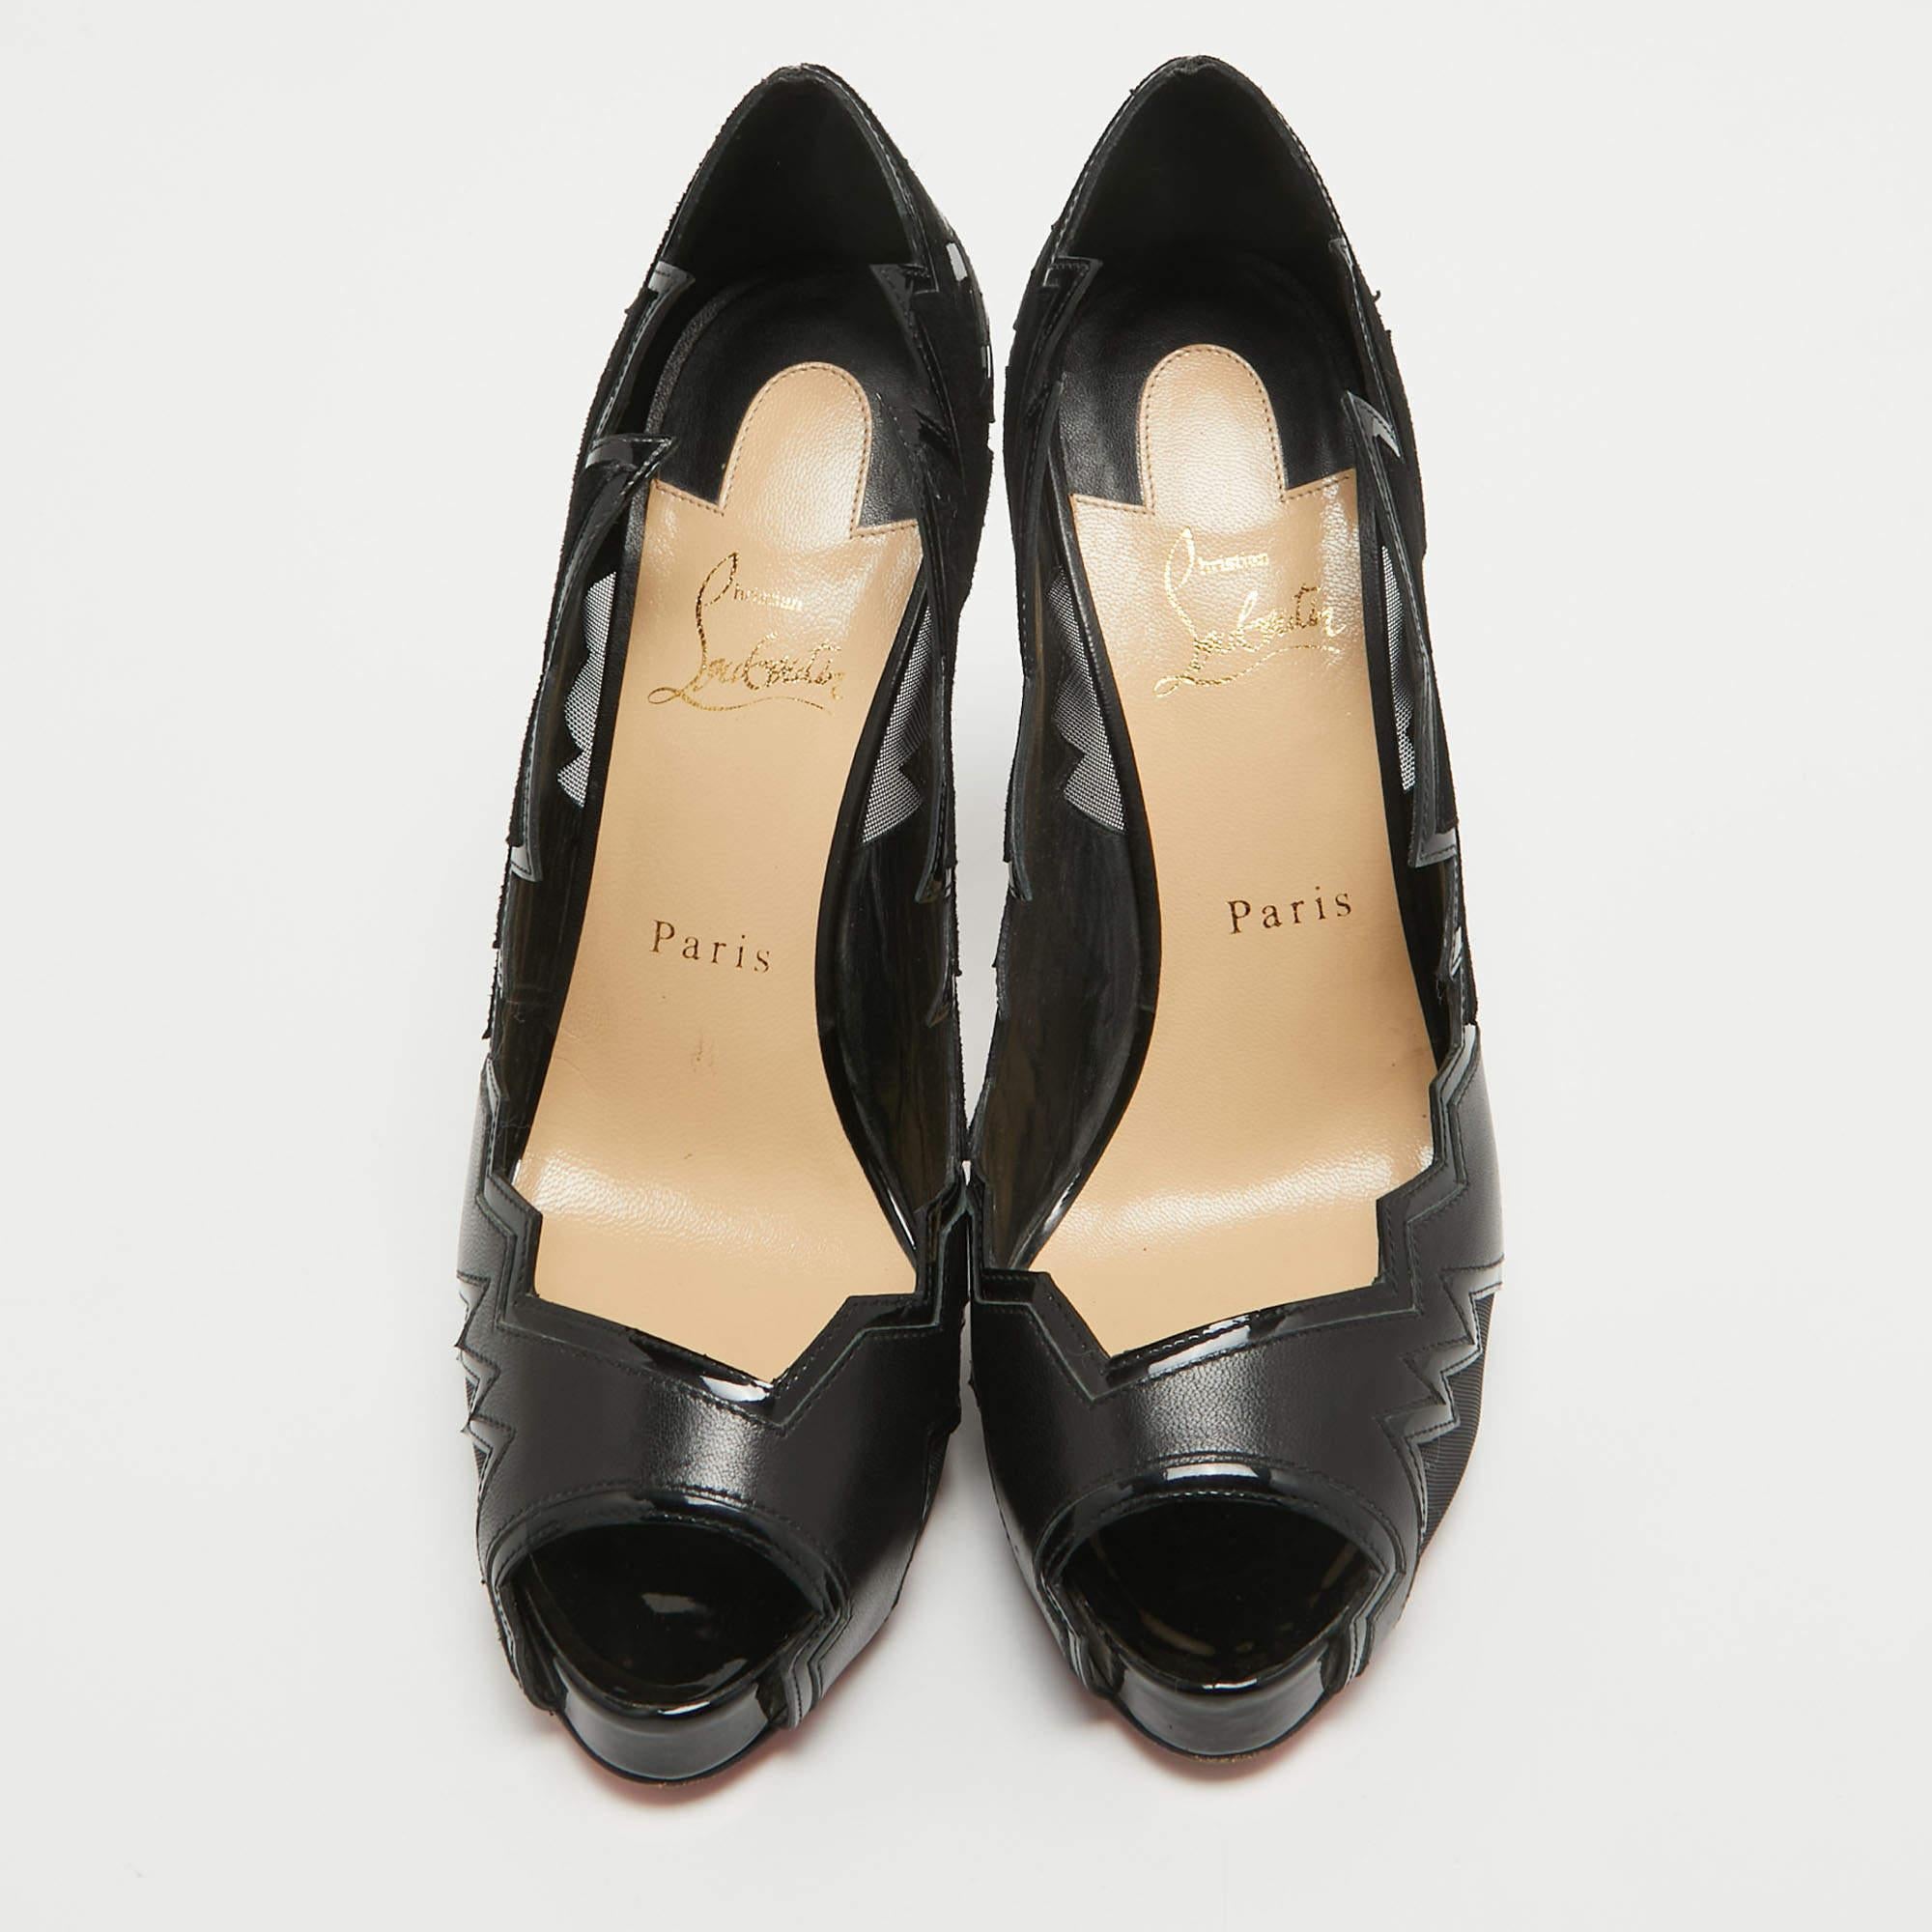 The fashion house’s tradition of excellence, coupled with modern design sensibilities, works to make these pumps a fabulous choice. They'll help you deliver a chic look with ease.

